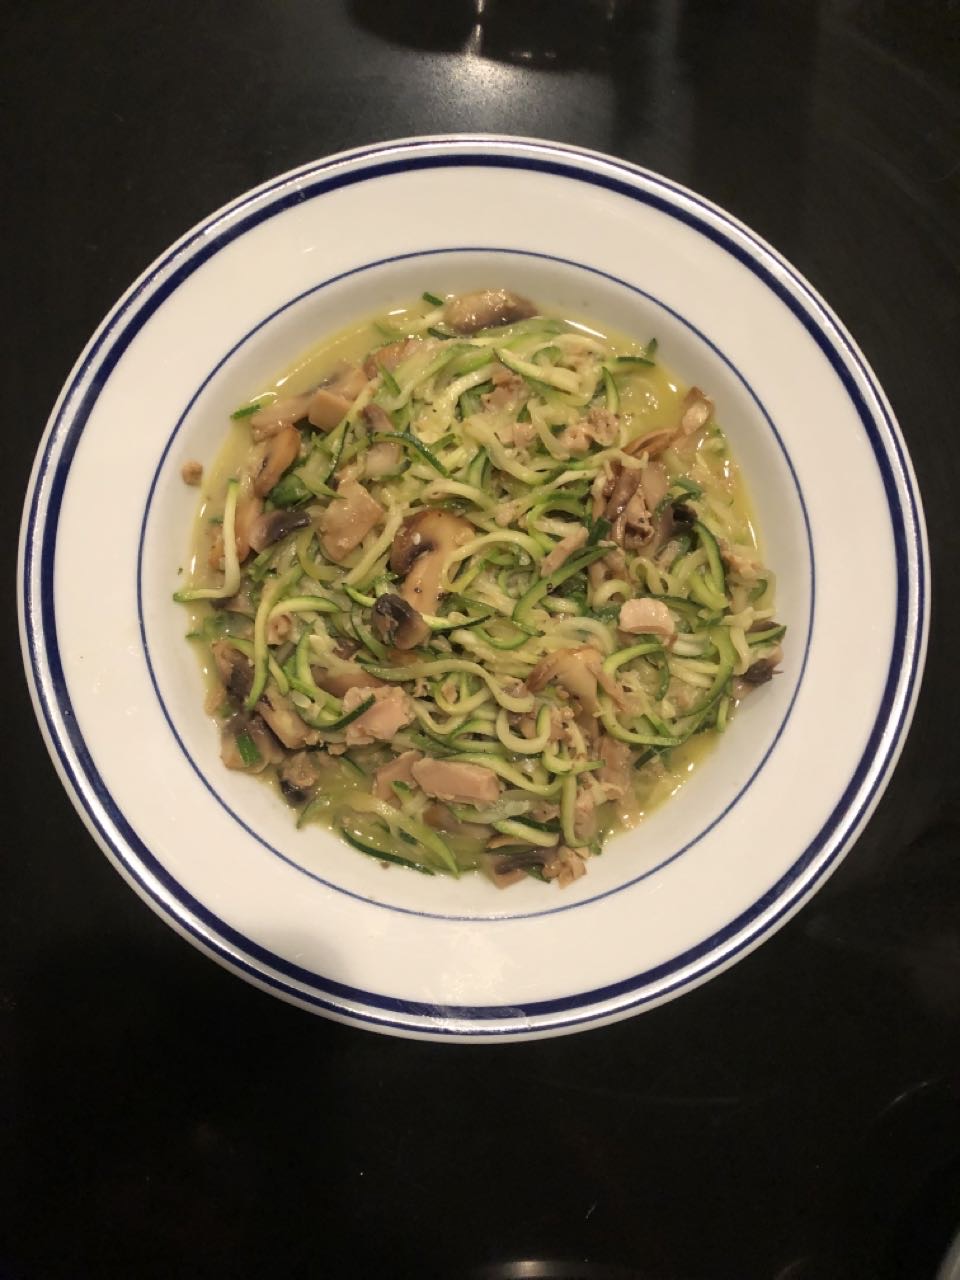 delicious-and-nutritious-Zoodles-linguine-and-clam-sauce-clams-garlic-small-fac4643c-734b-47ee-ac03-ef20ab013da4-post-image